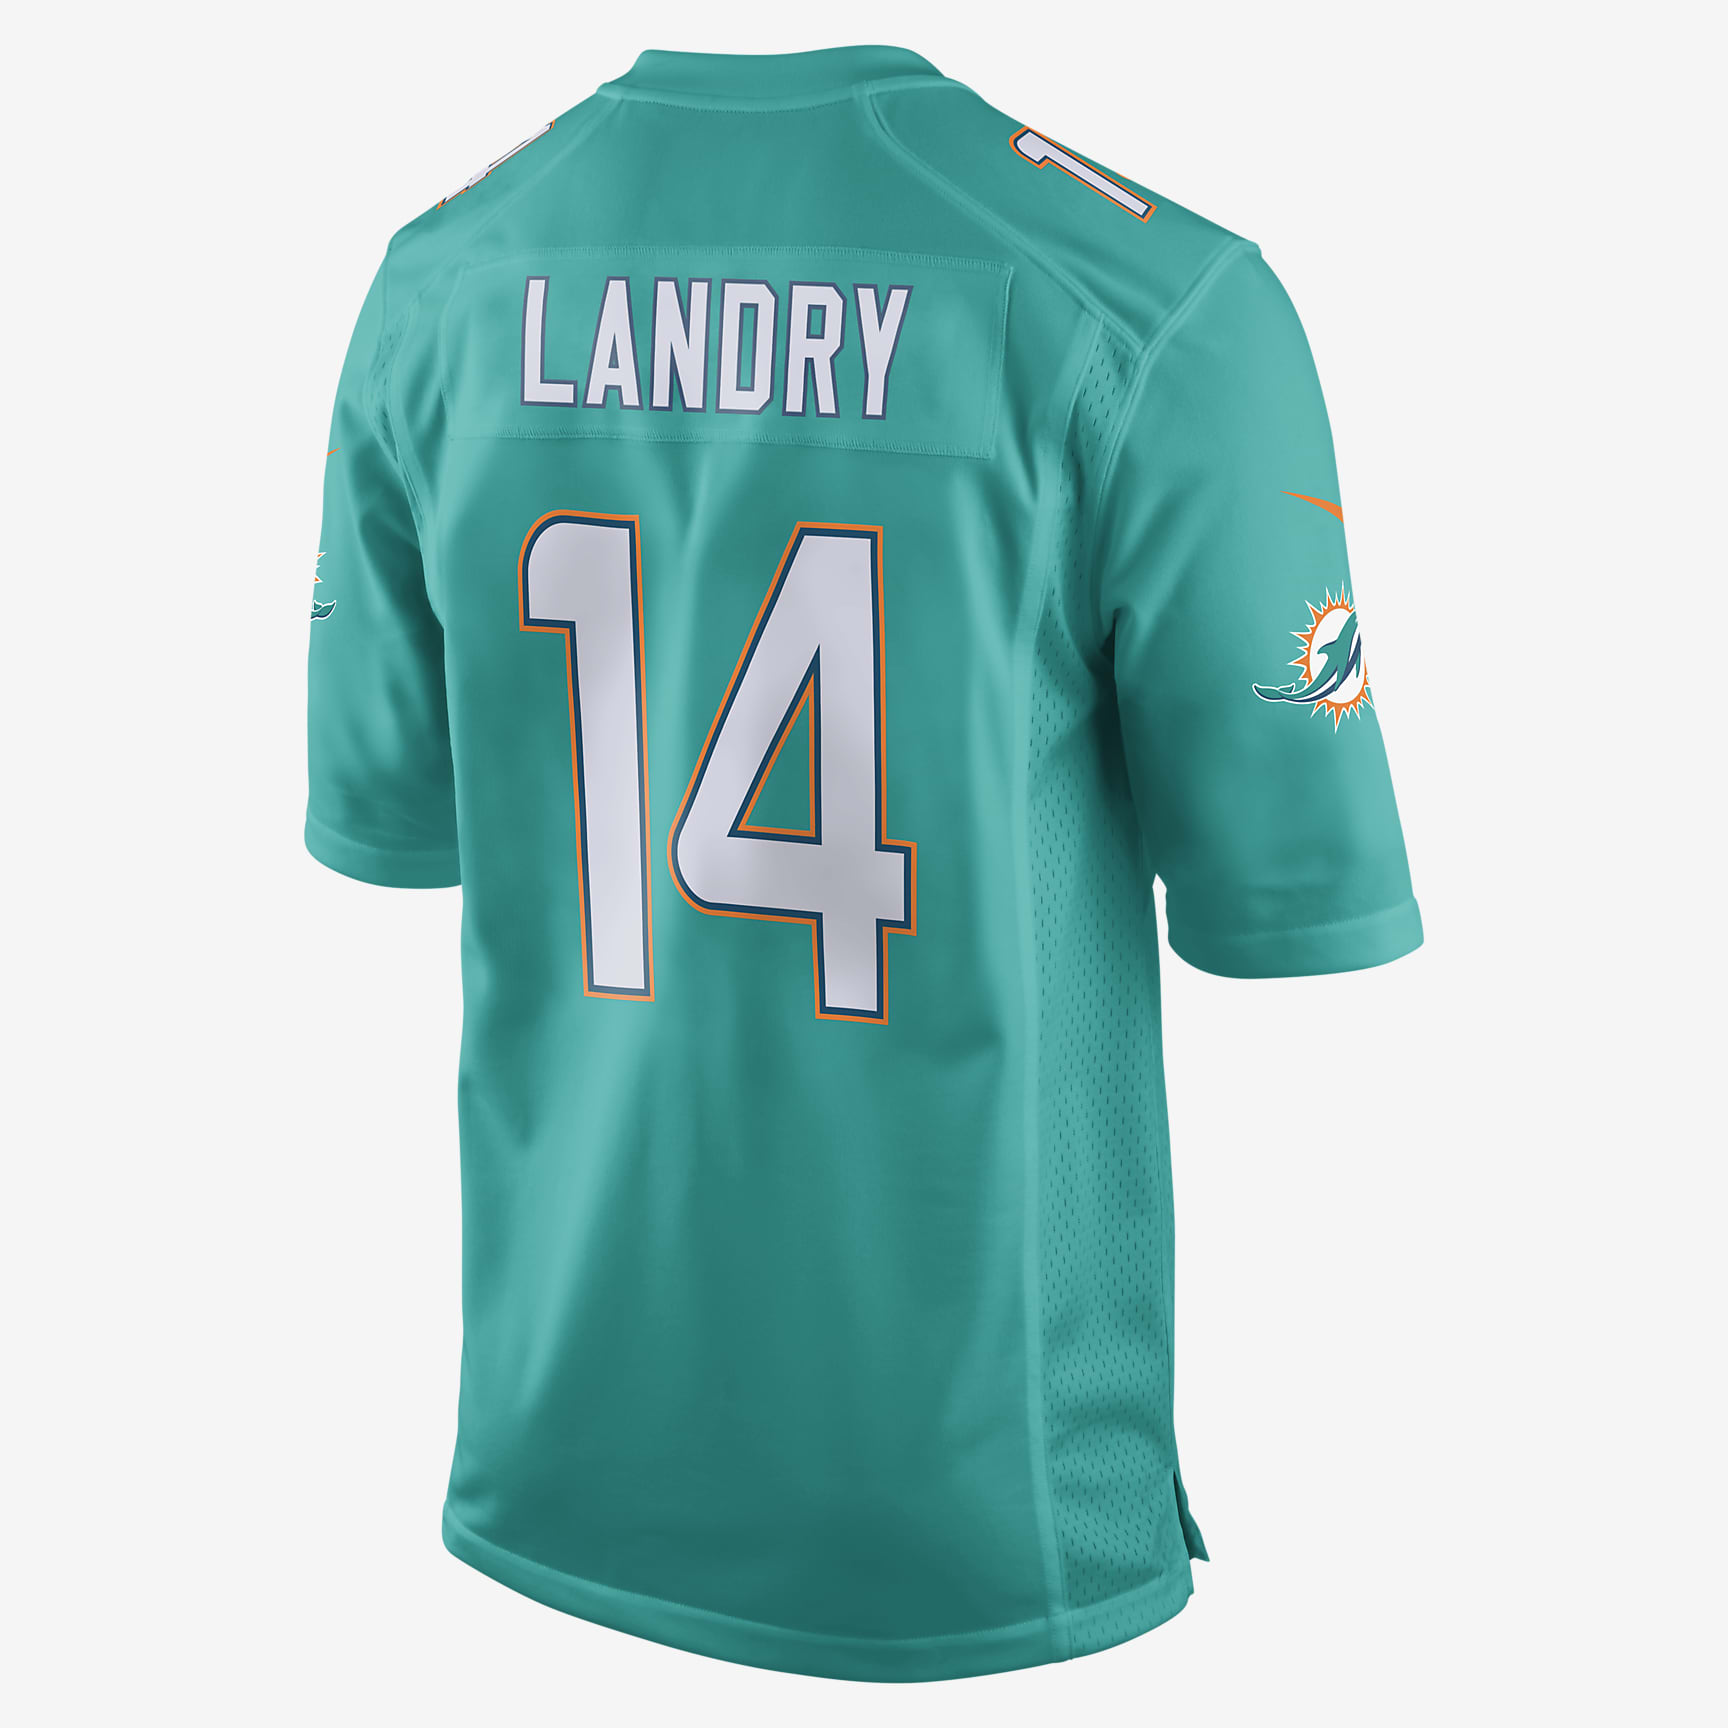 NFL Miami Dolphins (Jarvis Landry) Men's American Football Home Game ...